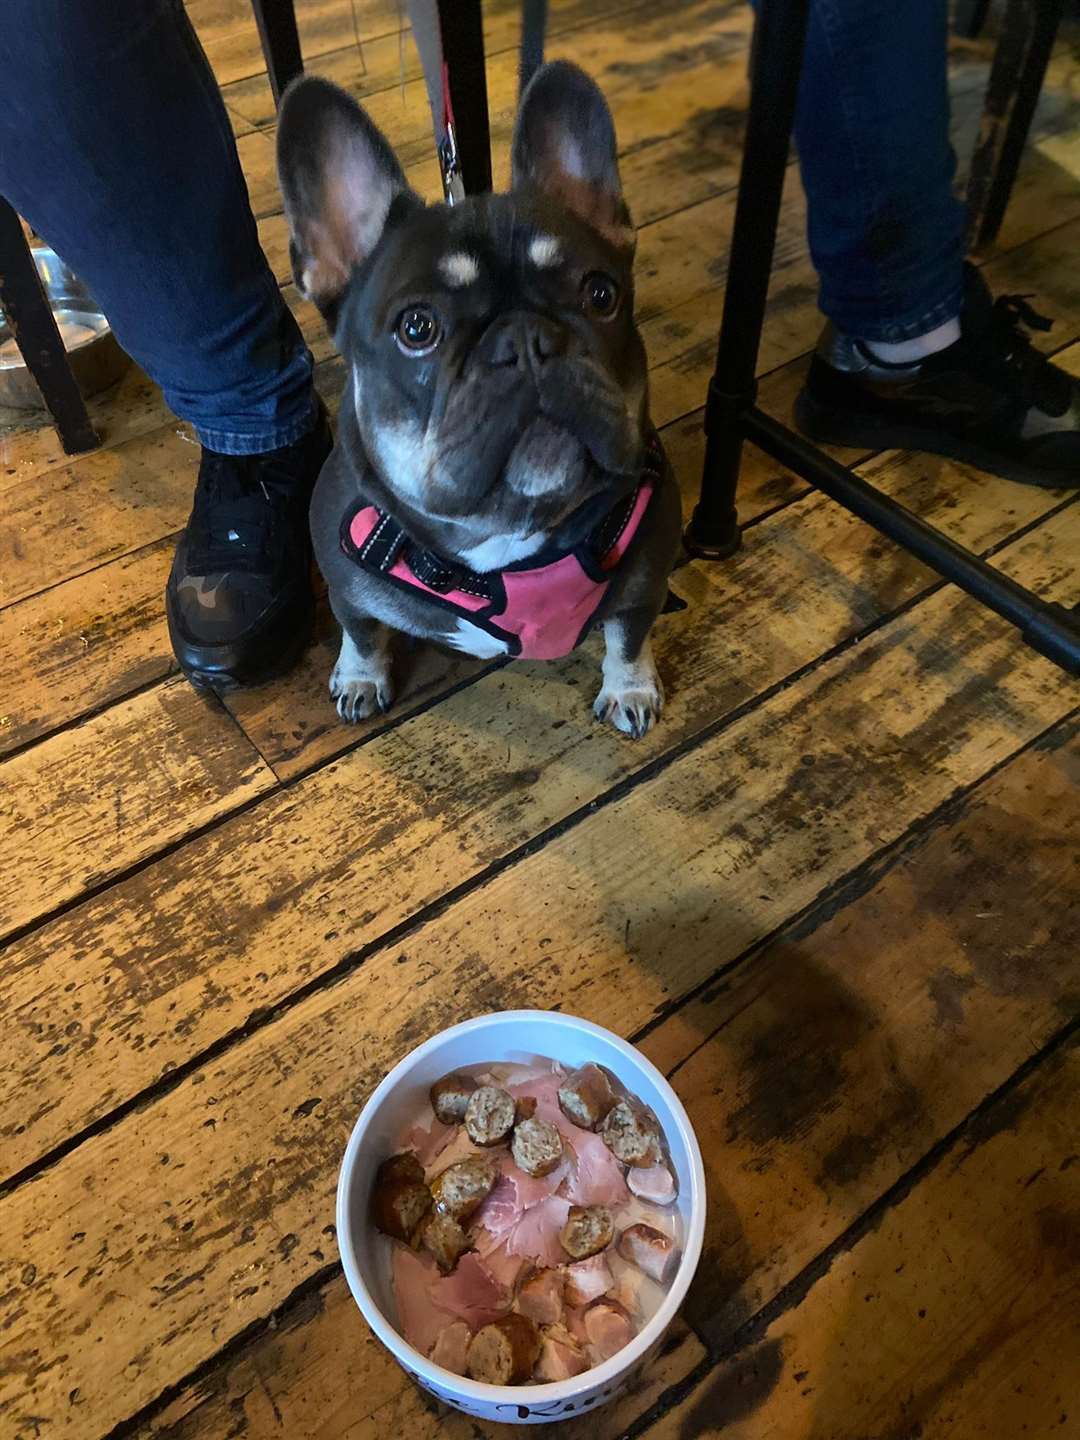 Nala enjoying her doggy meal at The Kings Arms in Offham, near West Malling